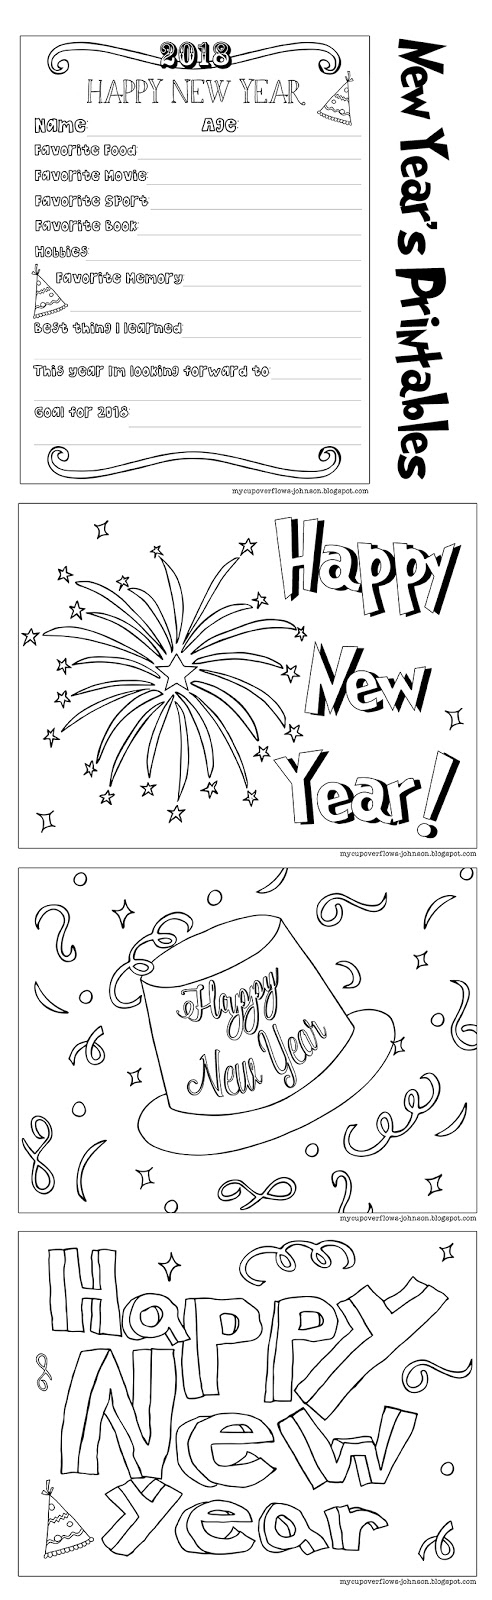 My Cup Overflows: Happy New Year 2018 - Free Printable 2018 New Years Coloring Pages